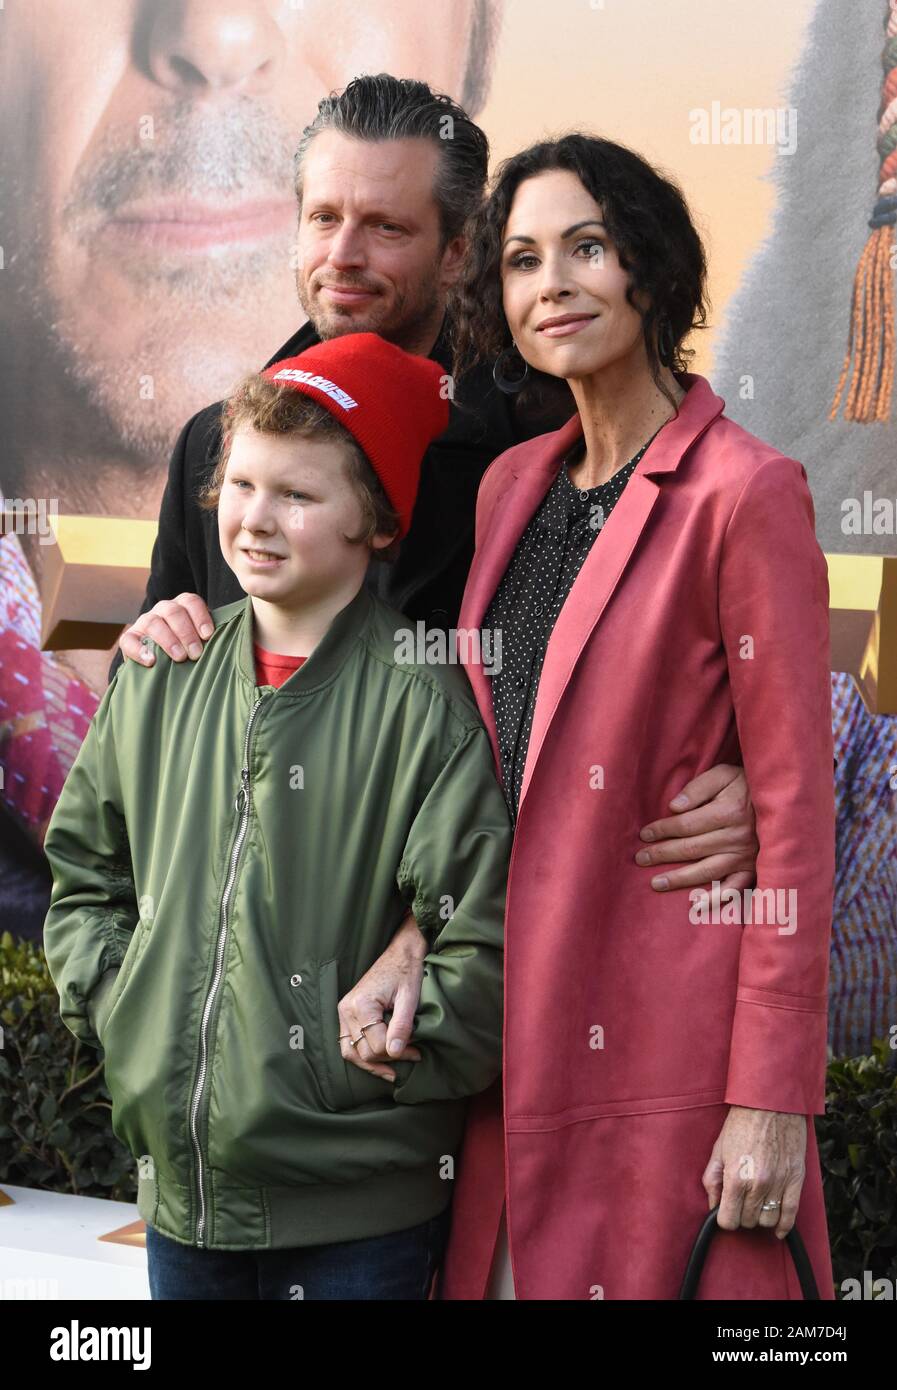 Westwood, California, USA 11th January 2020 Henry Story Driver, Addison O'Dea and actress Minnie Driver attend Universal Pictures' 'Dolittle' Premiere on January 11, 2020 at Regency Village Theatre in Westwood, California, USA. Photo by Barry King/Alamy Live News Stock Photo